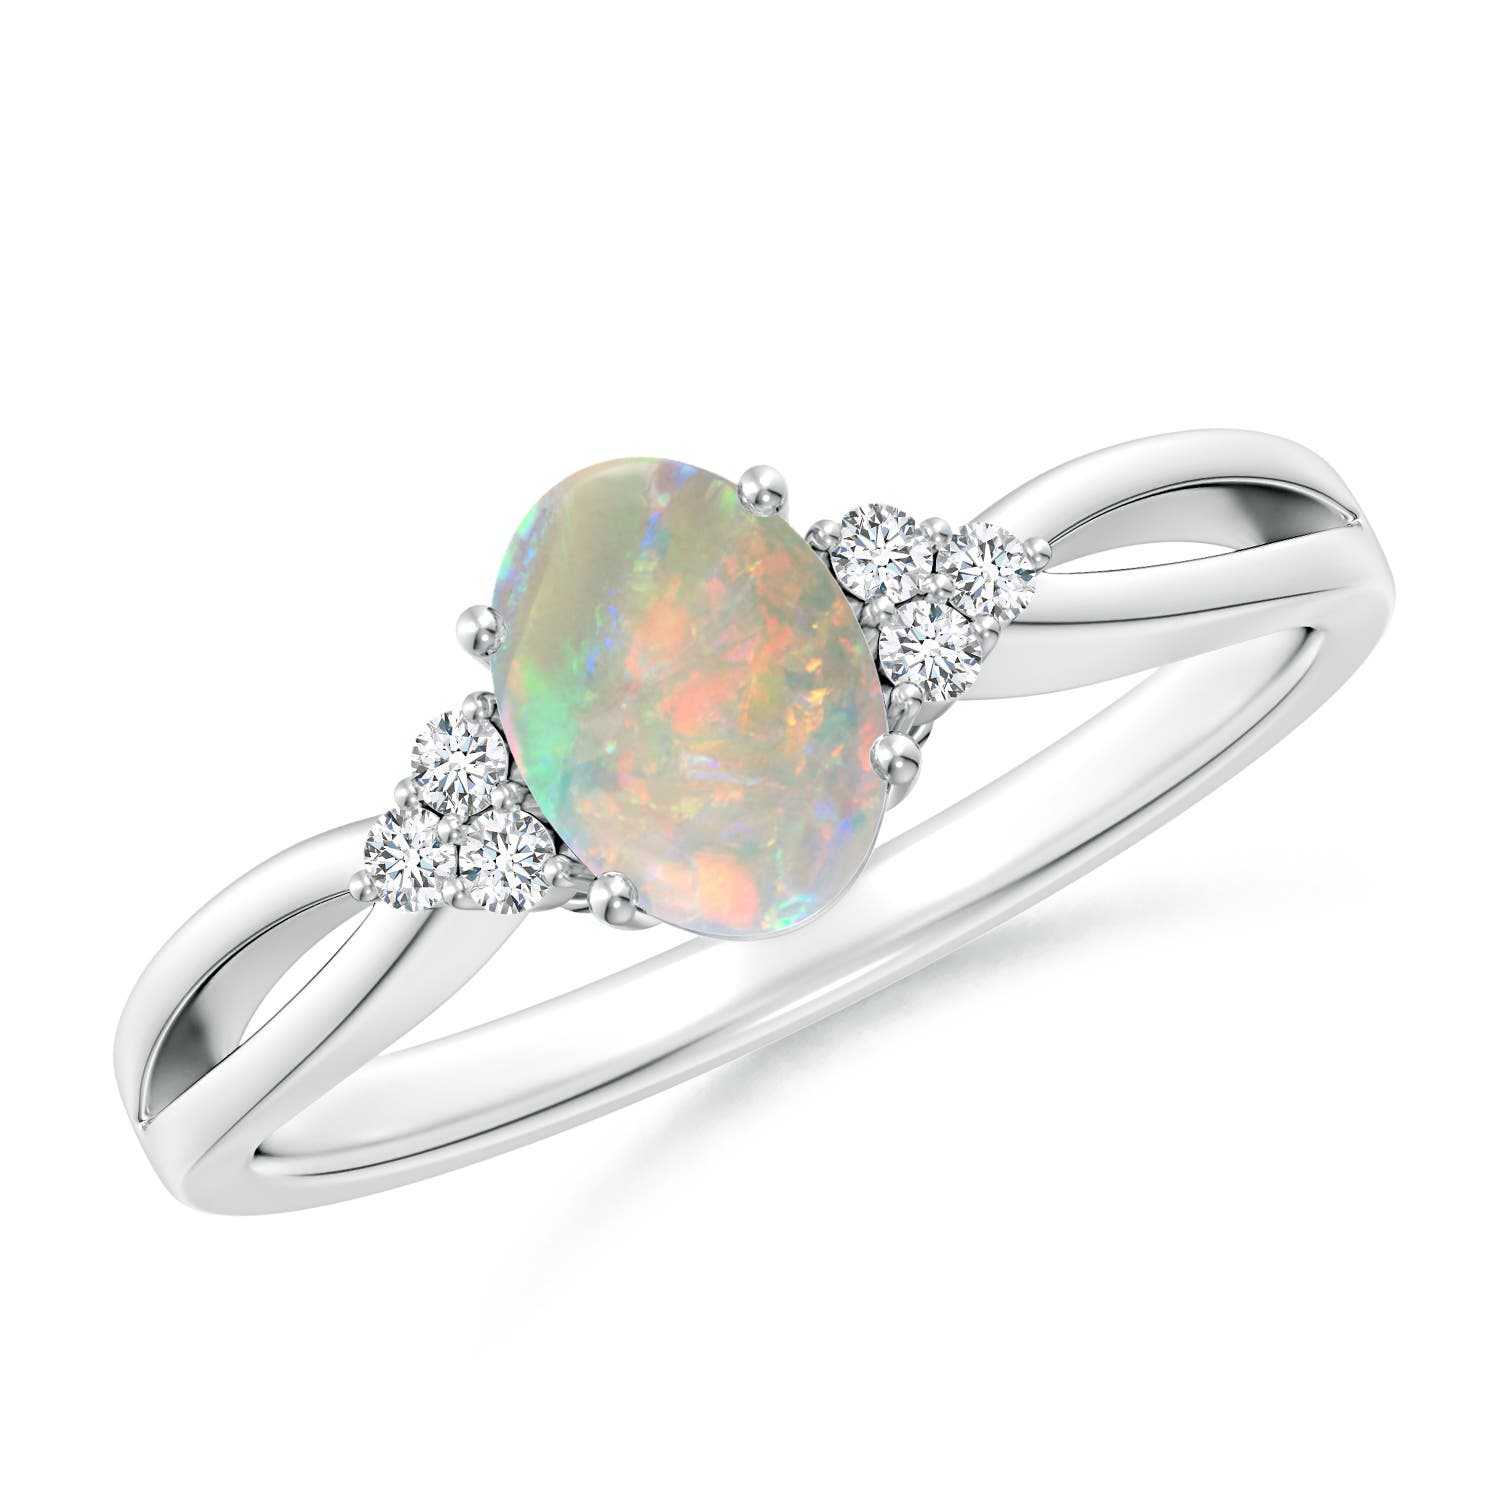 Solitaire Oval Opal Split Shank Ring with Trio Diamonds | Angara